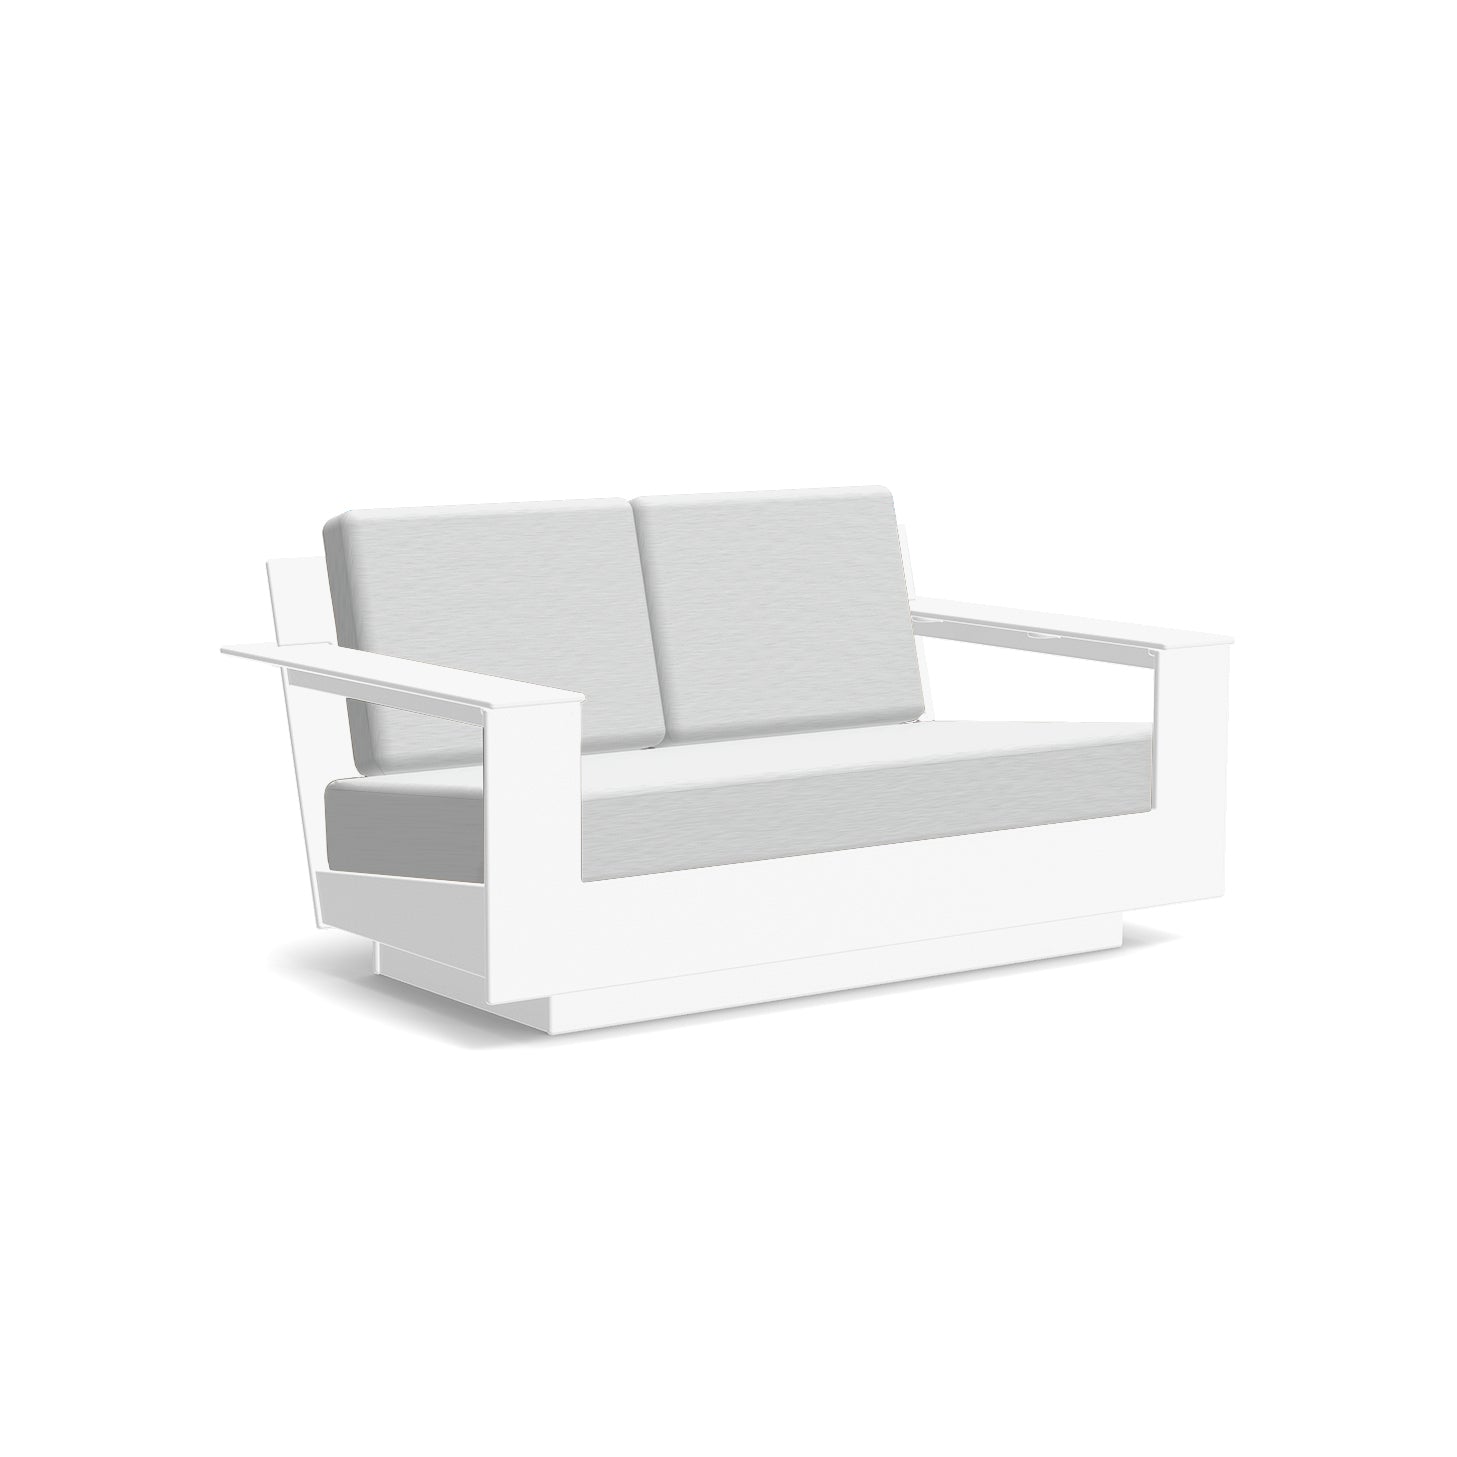 studio shot of nisswa loveseat in white with silver cushion